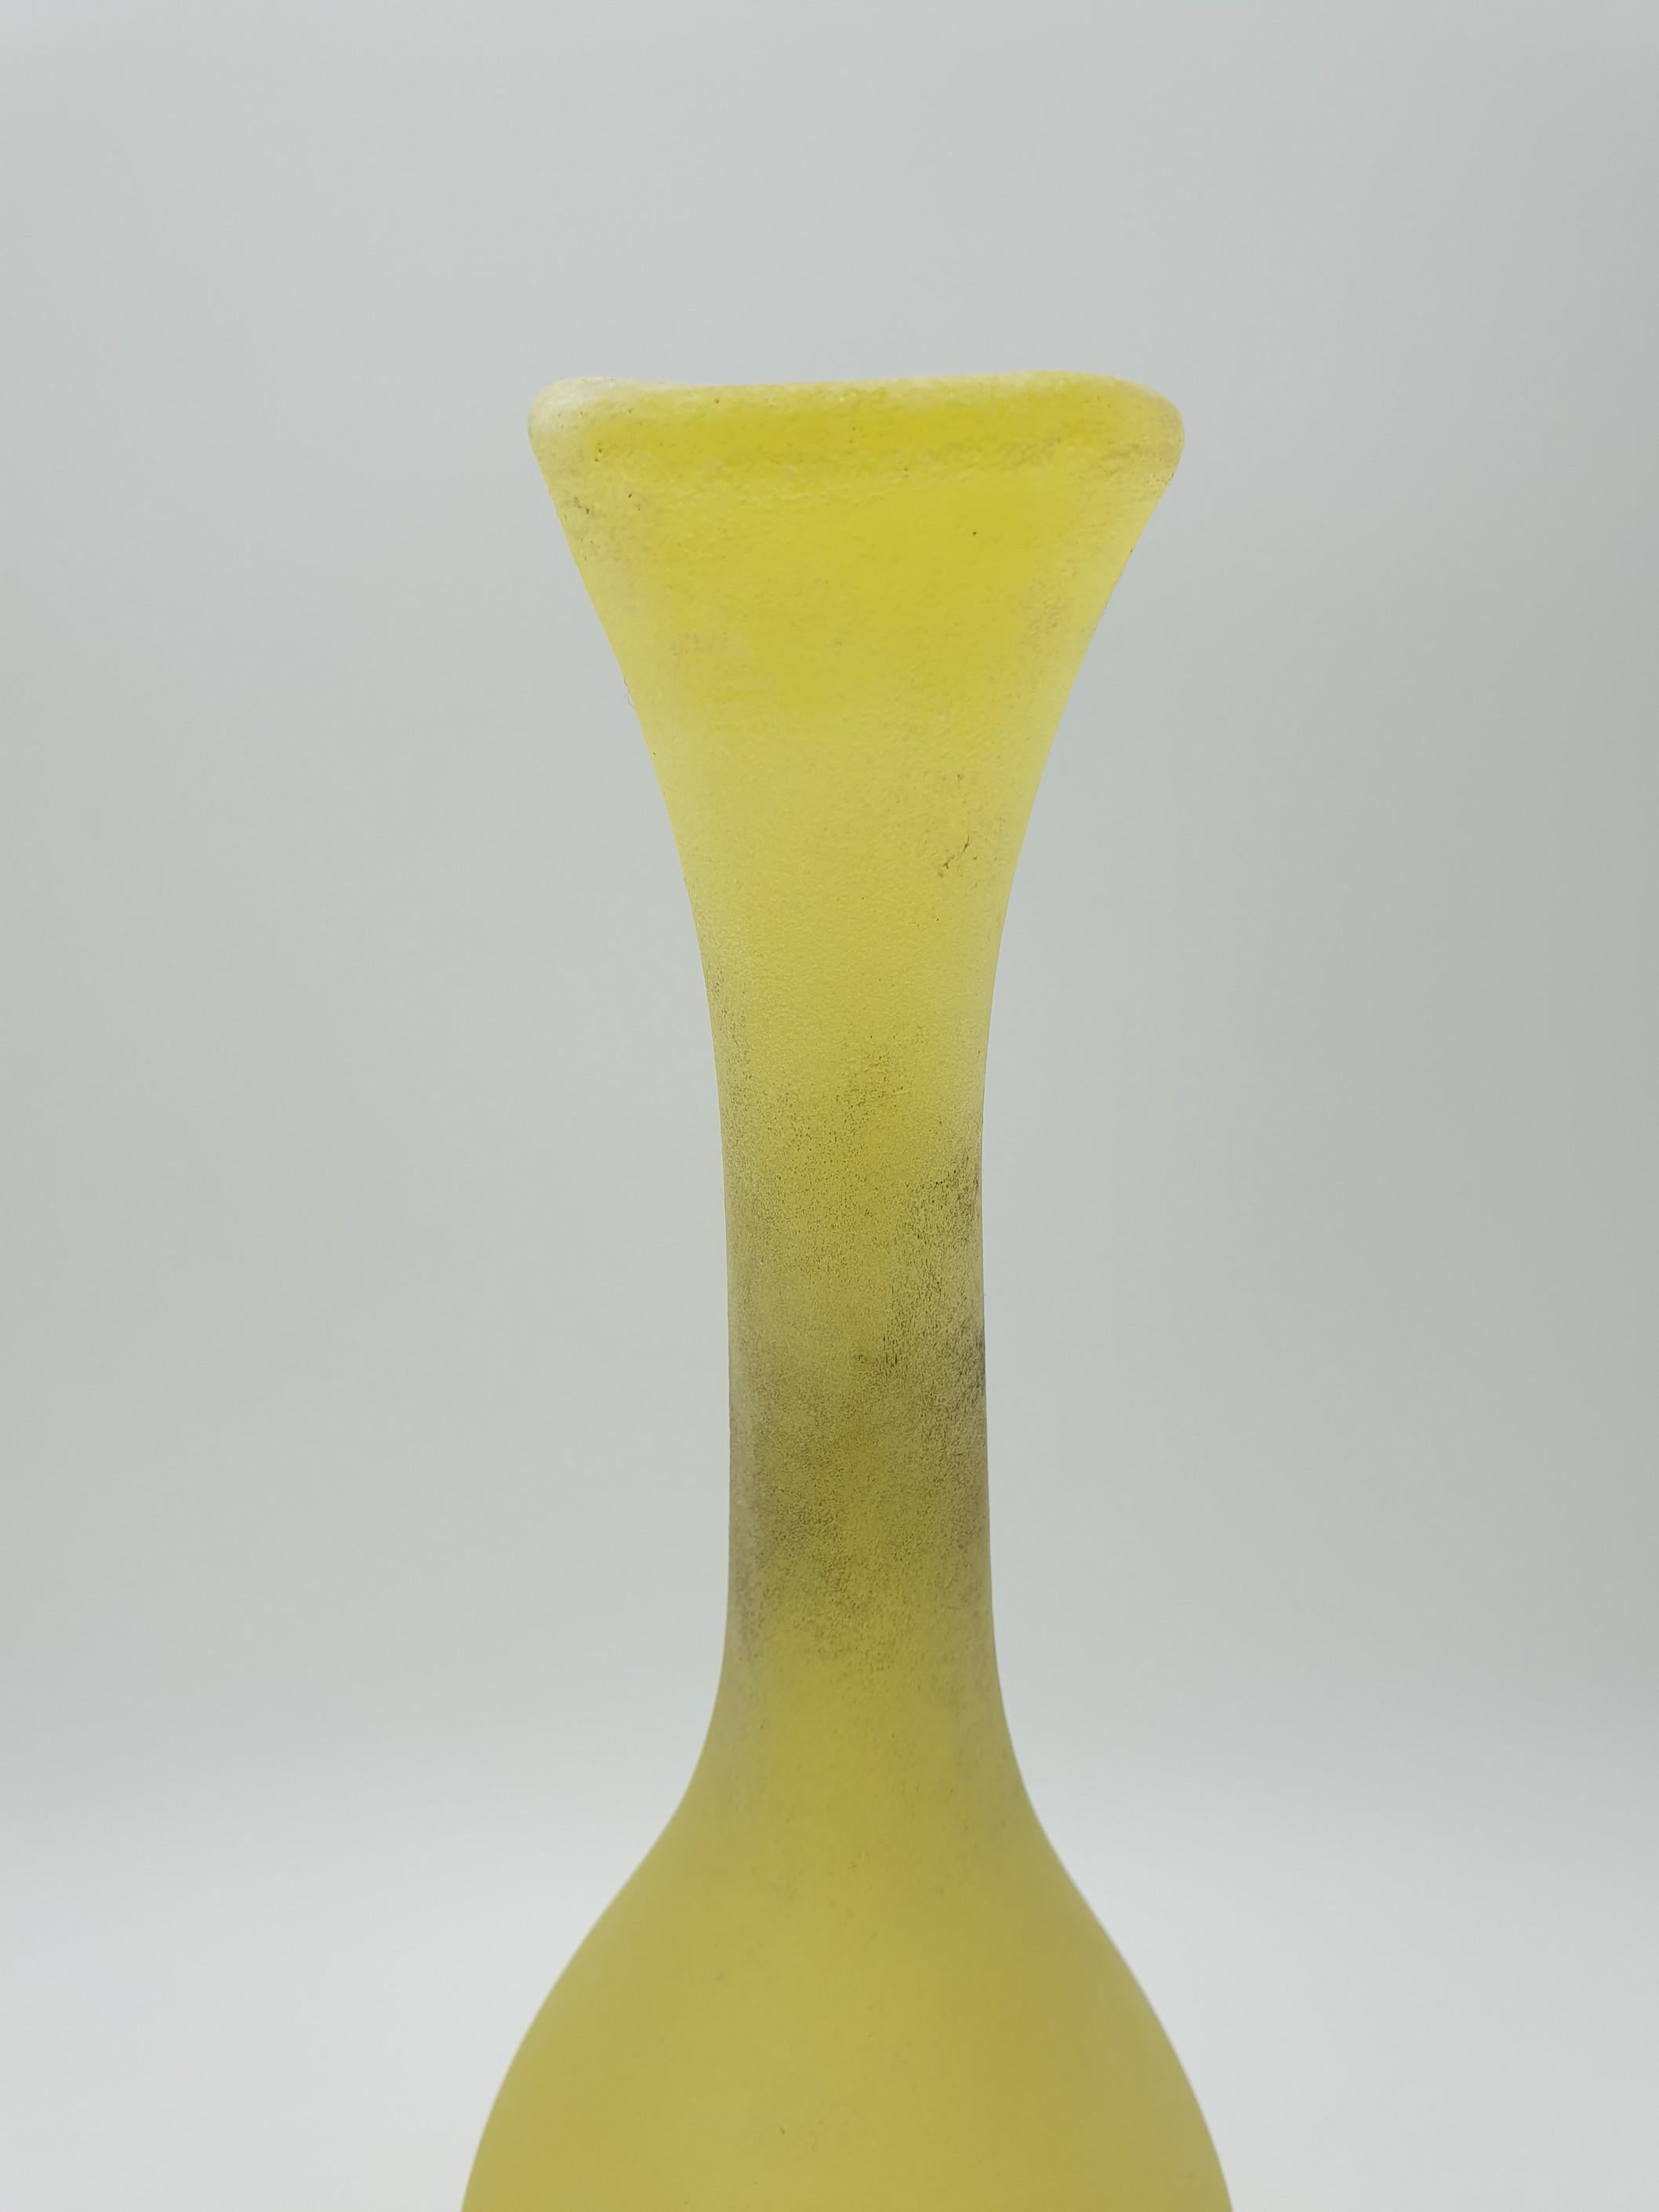 A bright yellow “scavo” glass bottle by Gino Cenedese e Filgio. This piece features the “scavo” finish that made Cenedese famous and still distinguishes the company production among glass producers. 